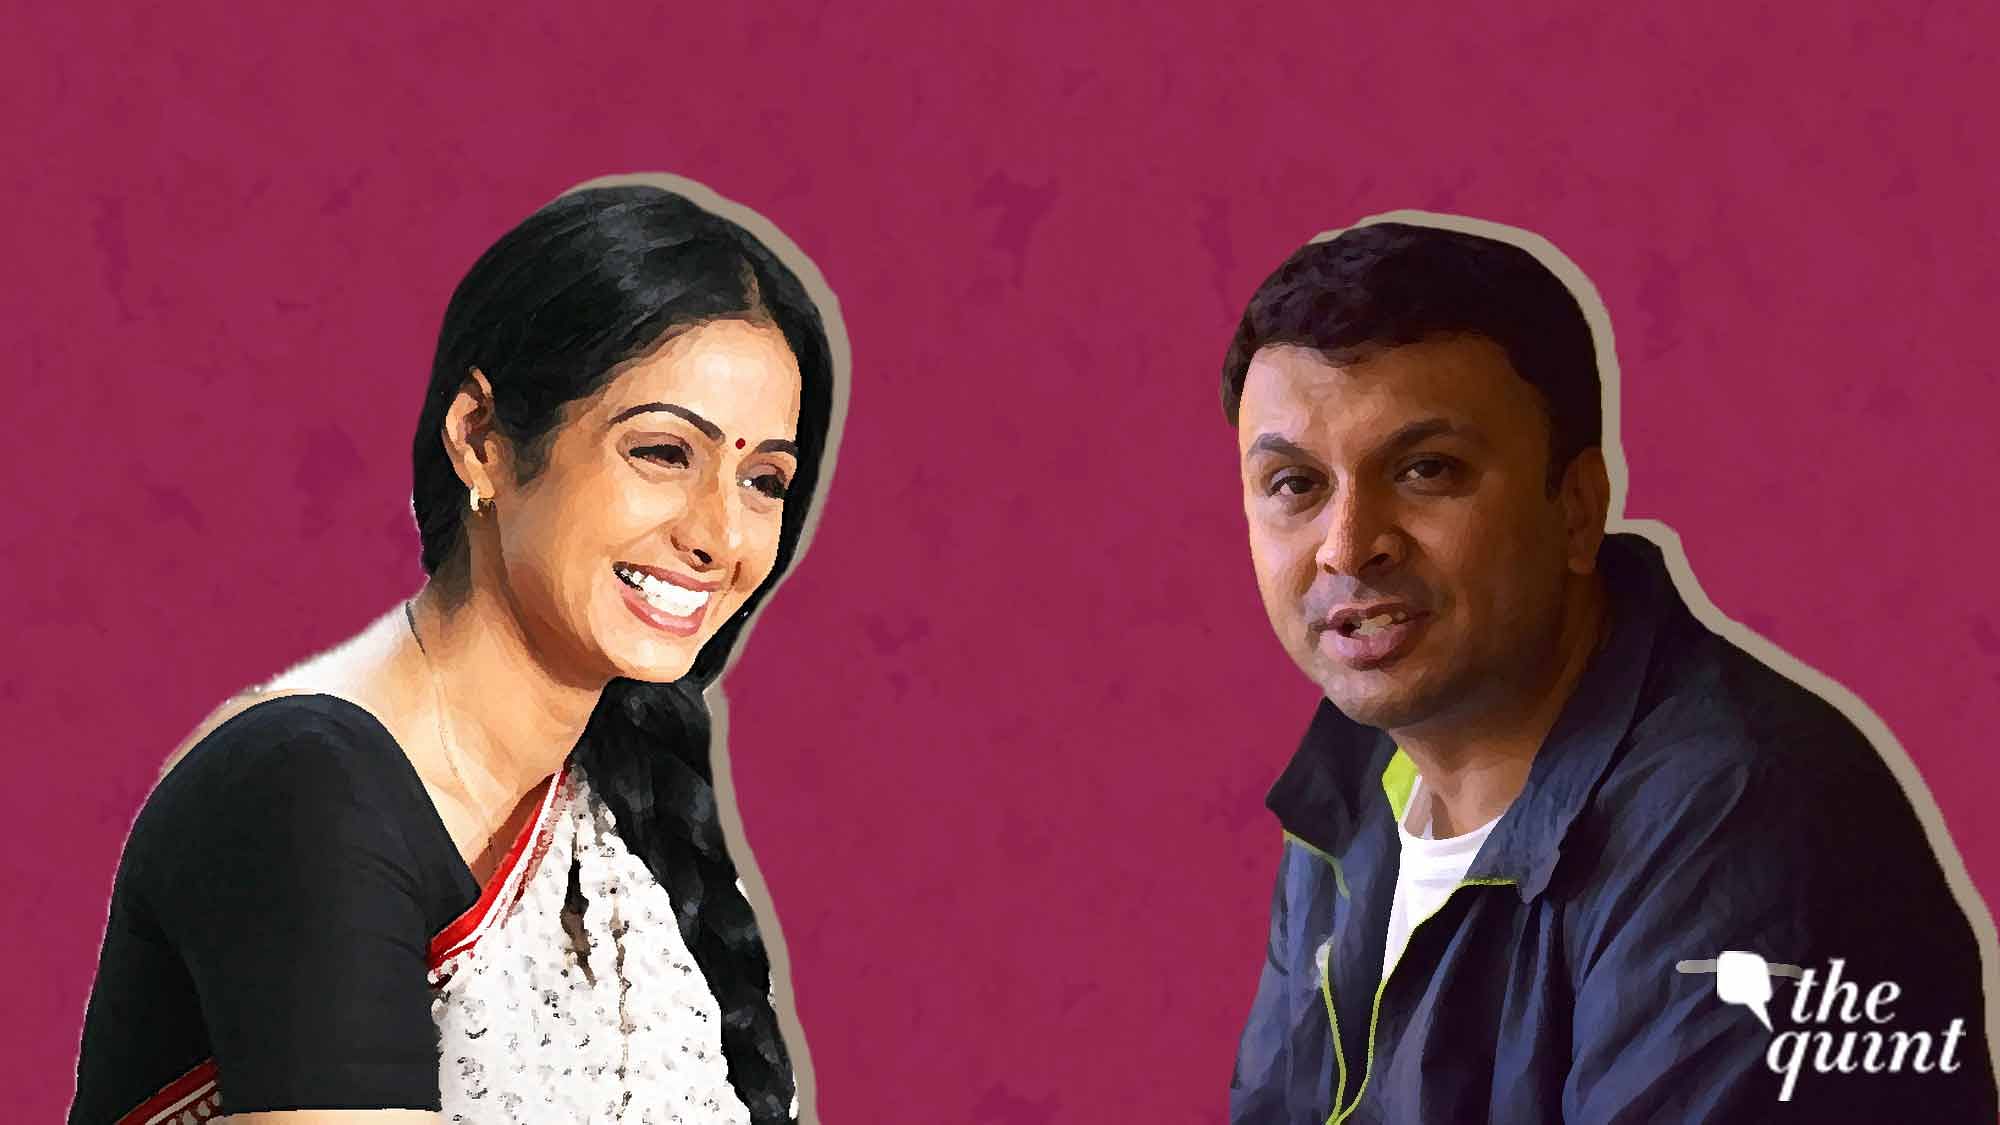 Harish Iyer on how watching Sridevi on screen as he grew up helped shape him as a person.